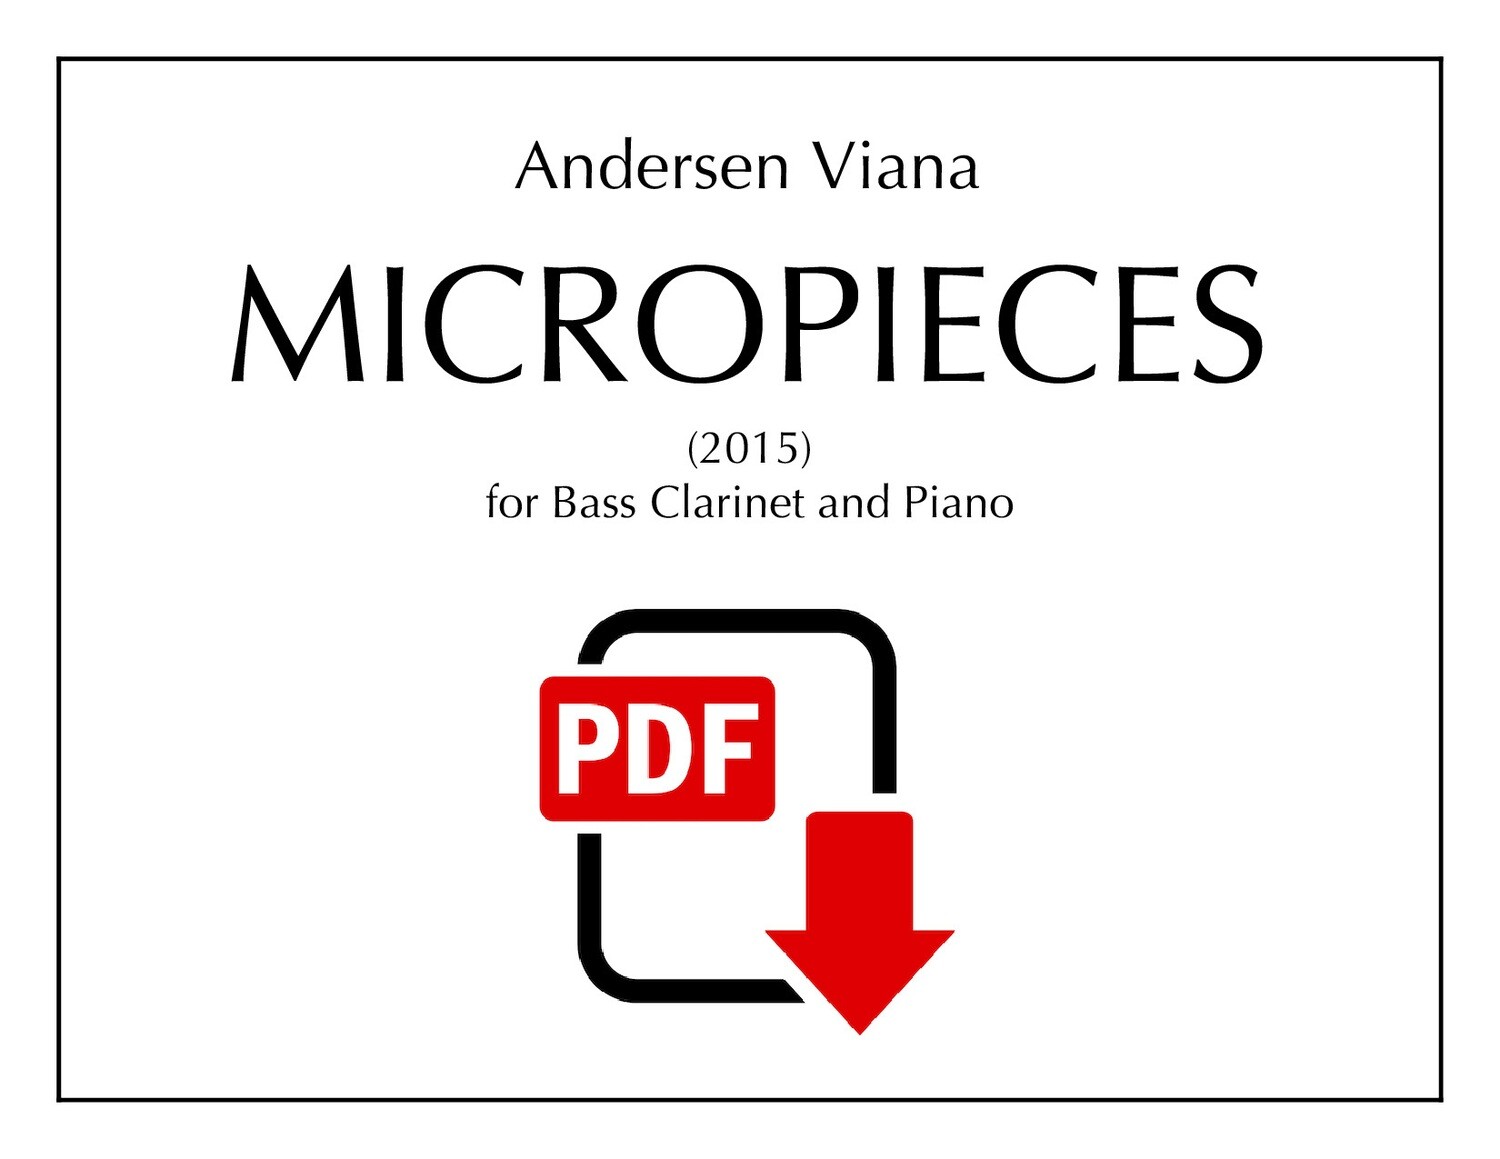 Viana: Micropieces for bass clarinet and piano (PDF)